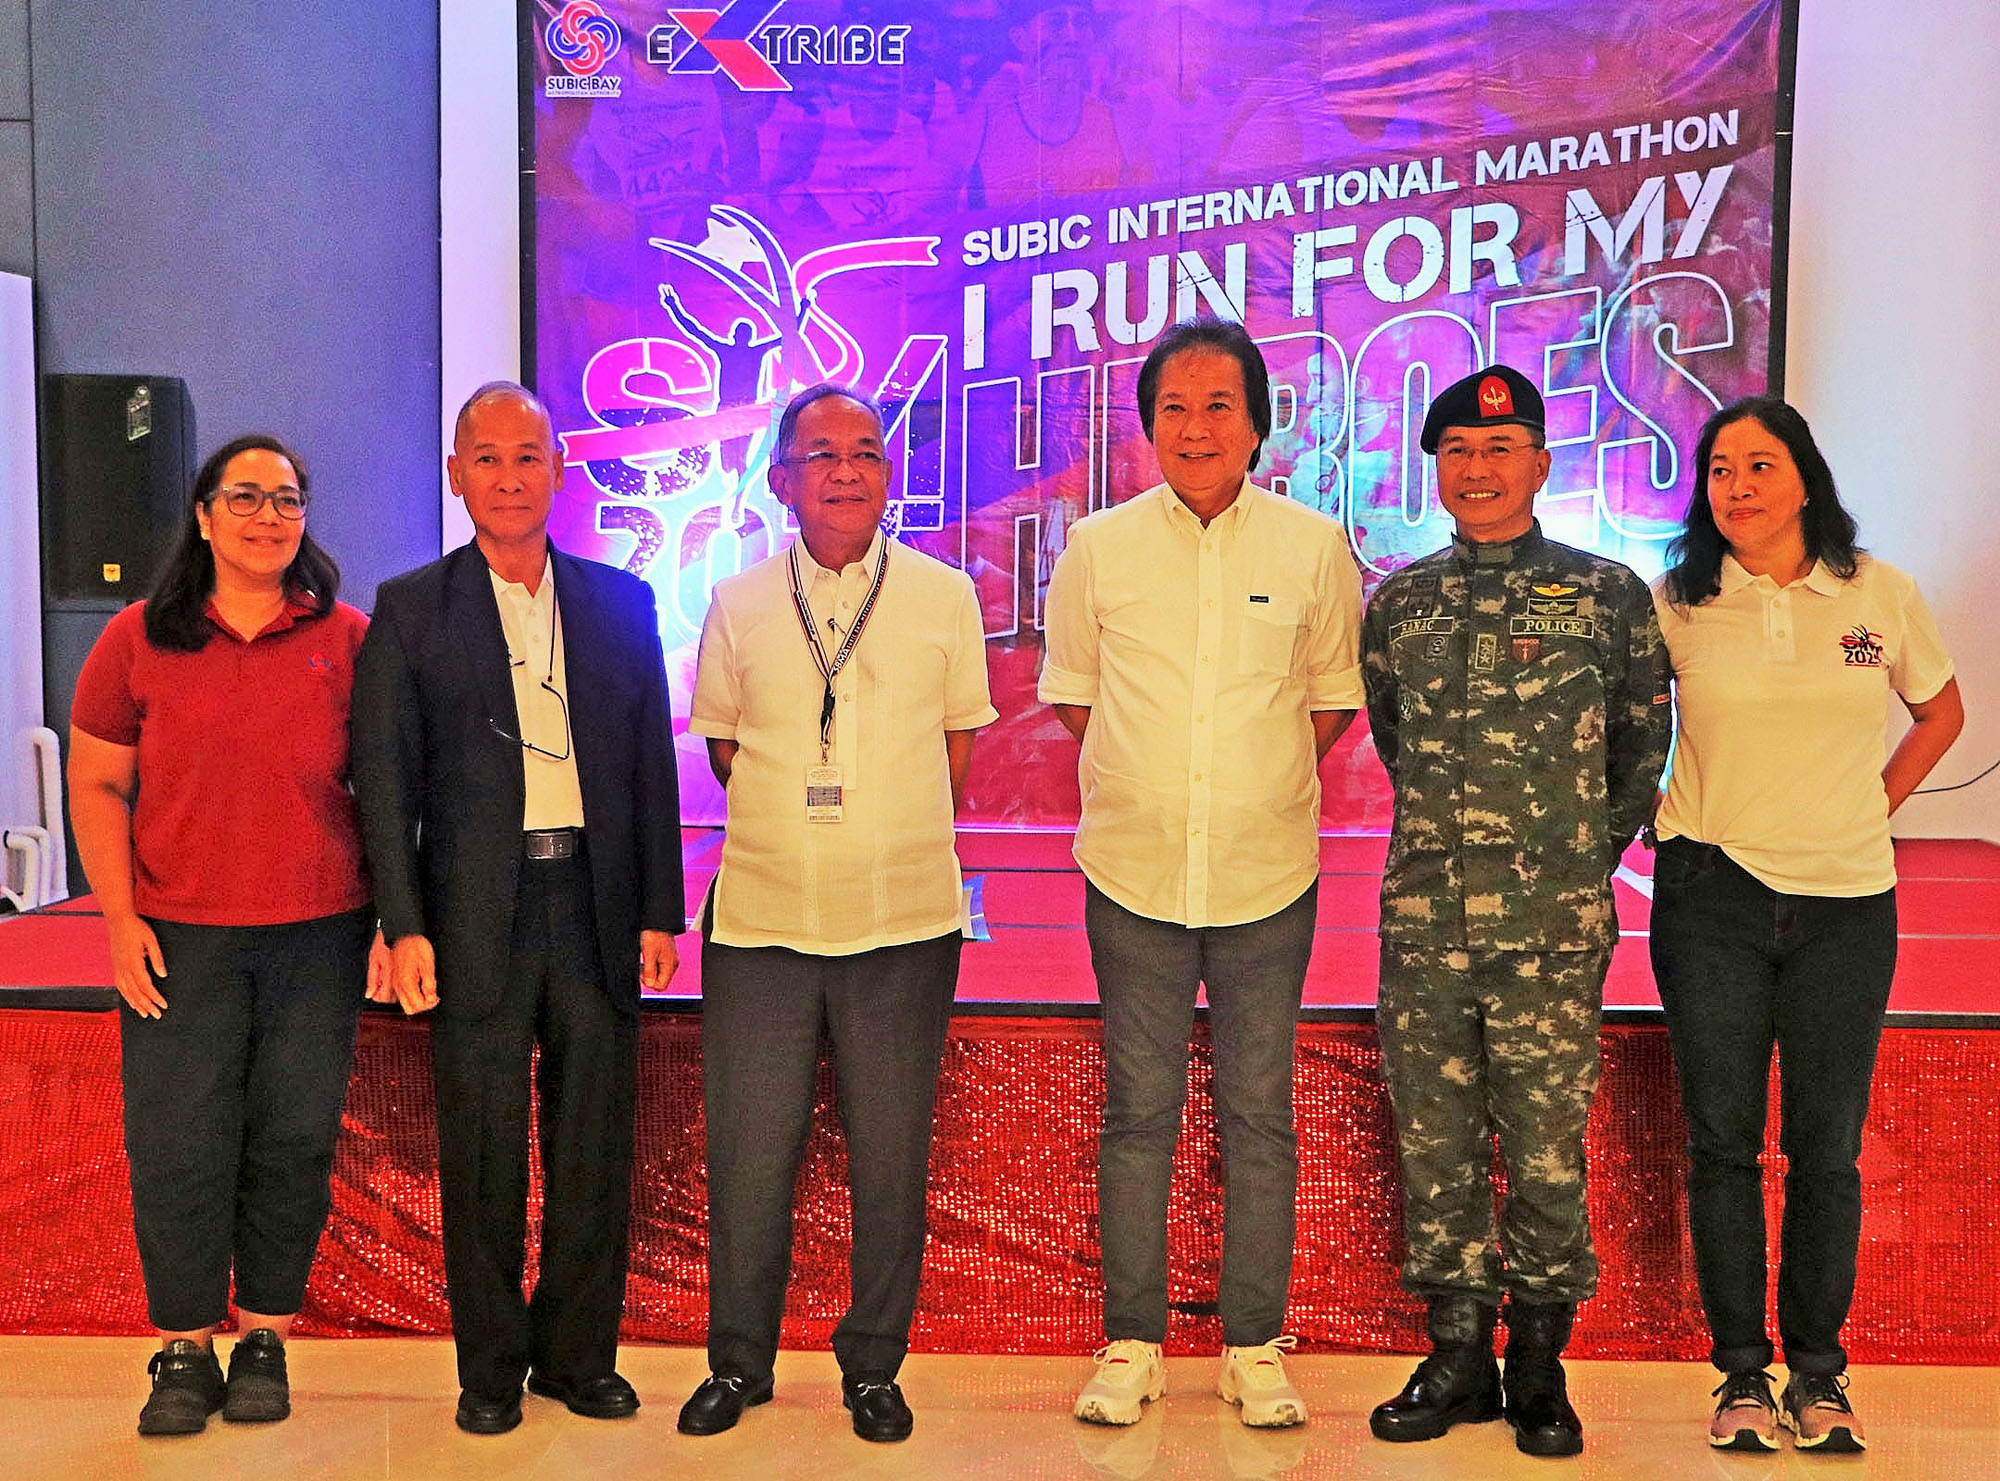 Subic Bay Metropolitan Authority (SBMA) Chairman and Administrator Eduardo Jose L. Aliño (3rd from left) joins (left to right) SBMA Tourism Department Manager Mary Jamelle Camba, Subic International Marathon (SIM) Executive Director Ret. Gen. Samson Tucay, SBMA Director Raul Marcelo, PNP Special Action Force Director General Bernie Banac and SIM Director and Extribe Managing Director Rosalyn Domingo Imperio for a ceremonial snap photo during the launching and kick-off program of SIM 2025 on held Thursday, April 4 at the Subic Riviera Hotel and Residences in the Subic Bay Freeport zone.